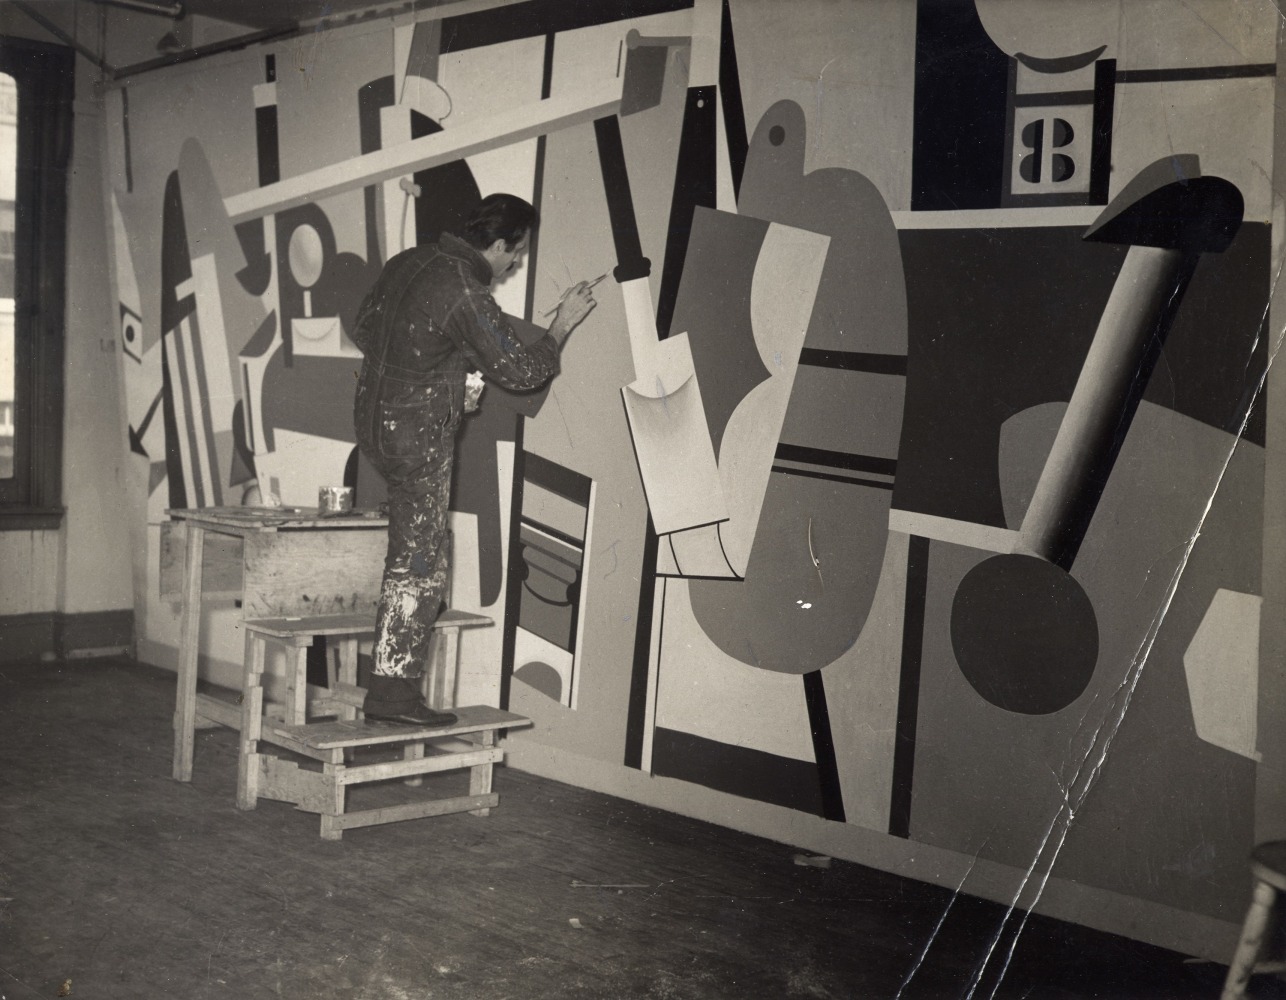 Man in dirty overalls on a step ladder painting a large abstract canvas panel suspended in a room